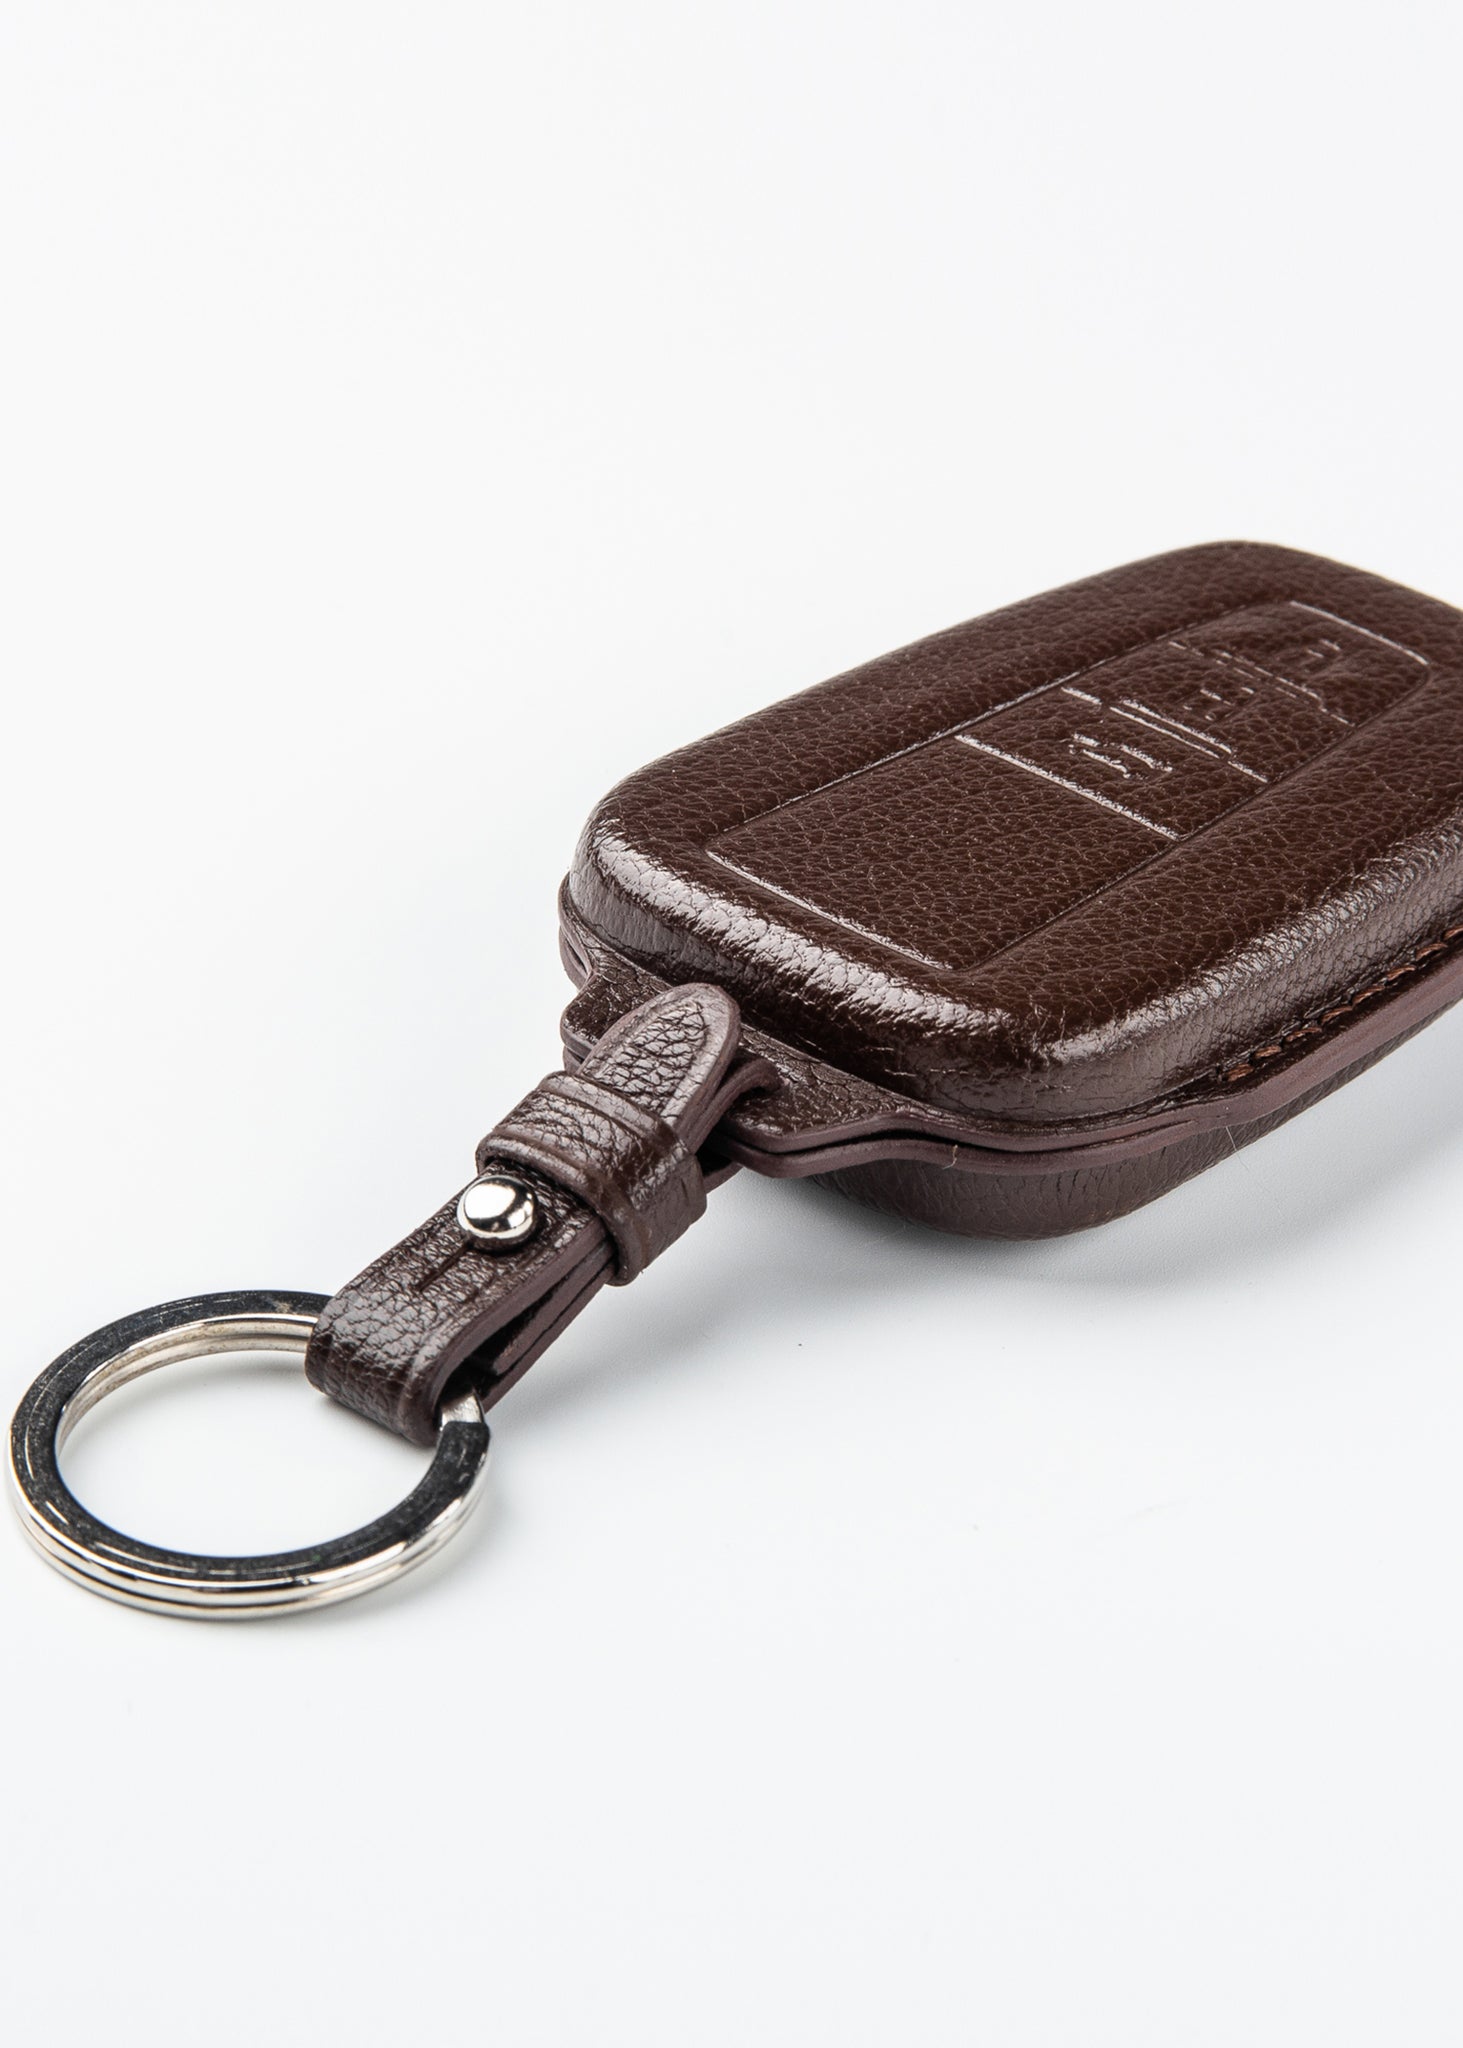 Timotheus for Toyota key fob cover case, Compatible with Toyota key case, Handmade Genuine Leather for Toyota keychains | TY77